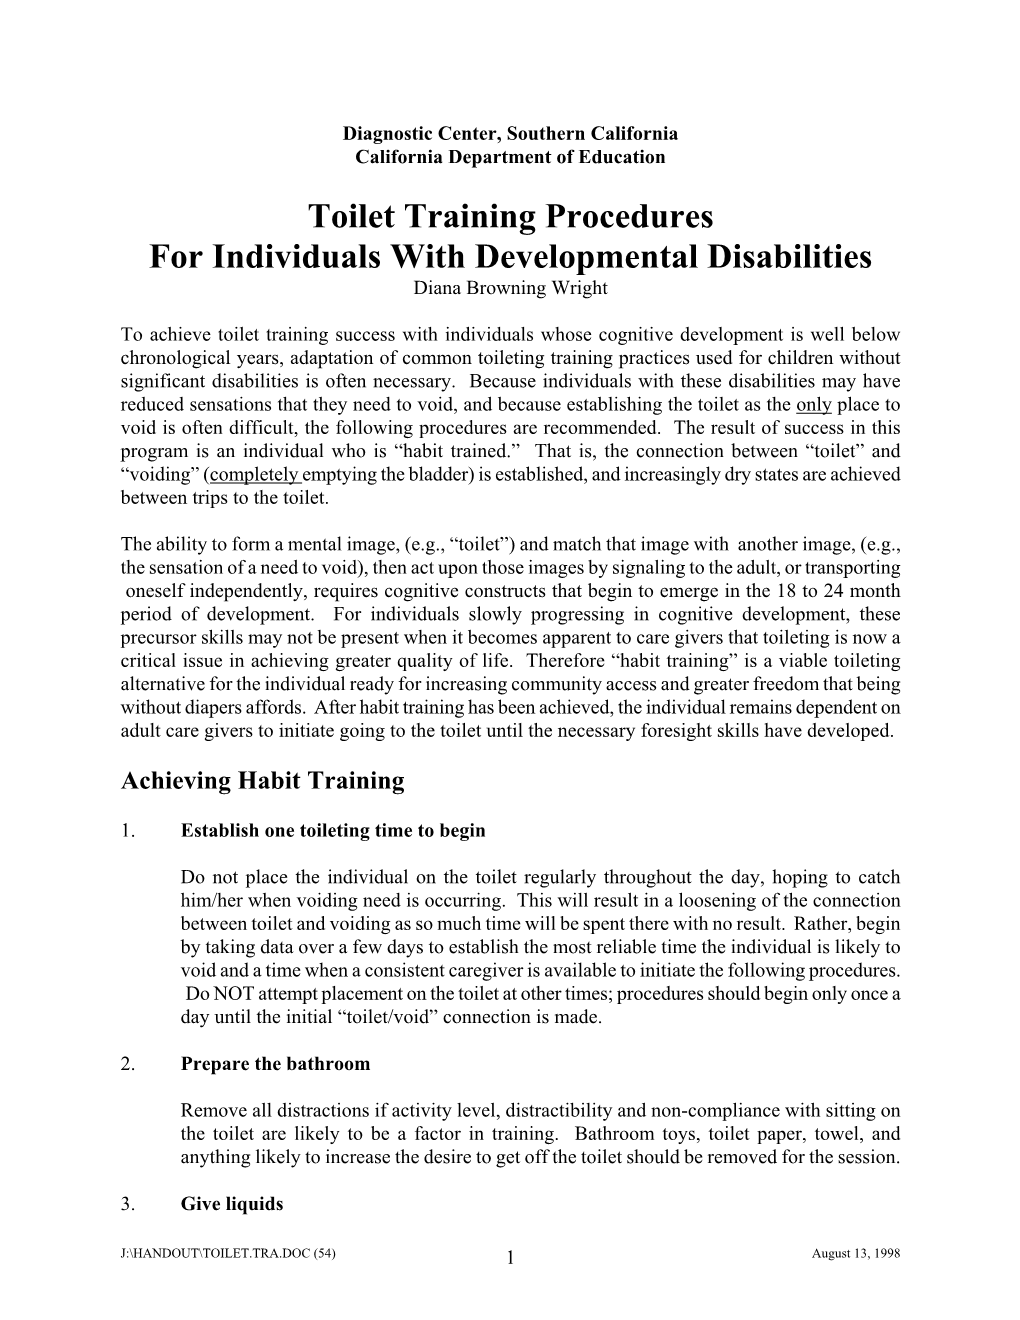 Toilet Training Procedures for Individuals with Developmental Disabilities Diana Browning Wright